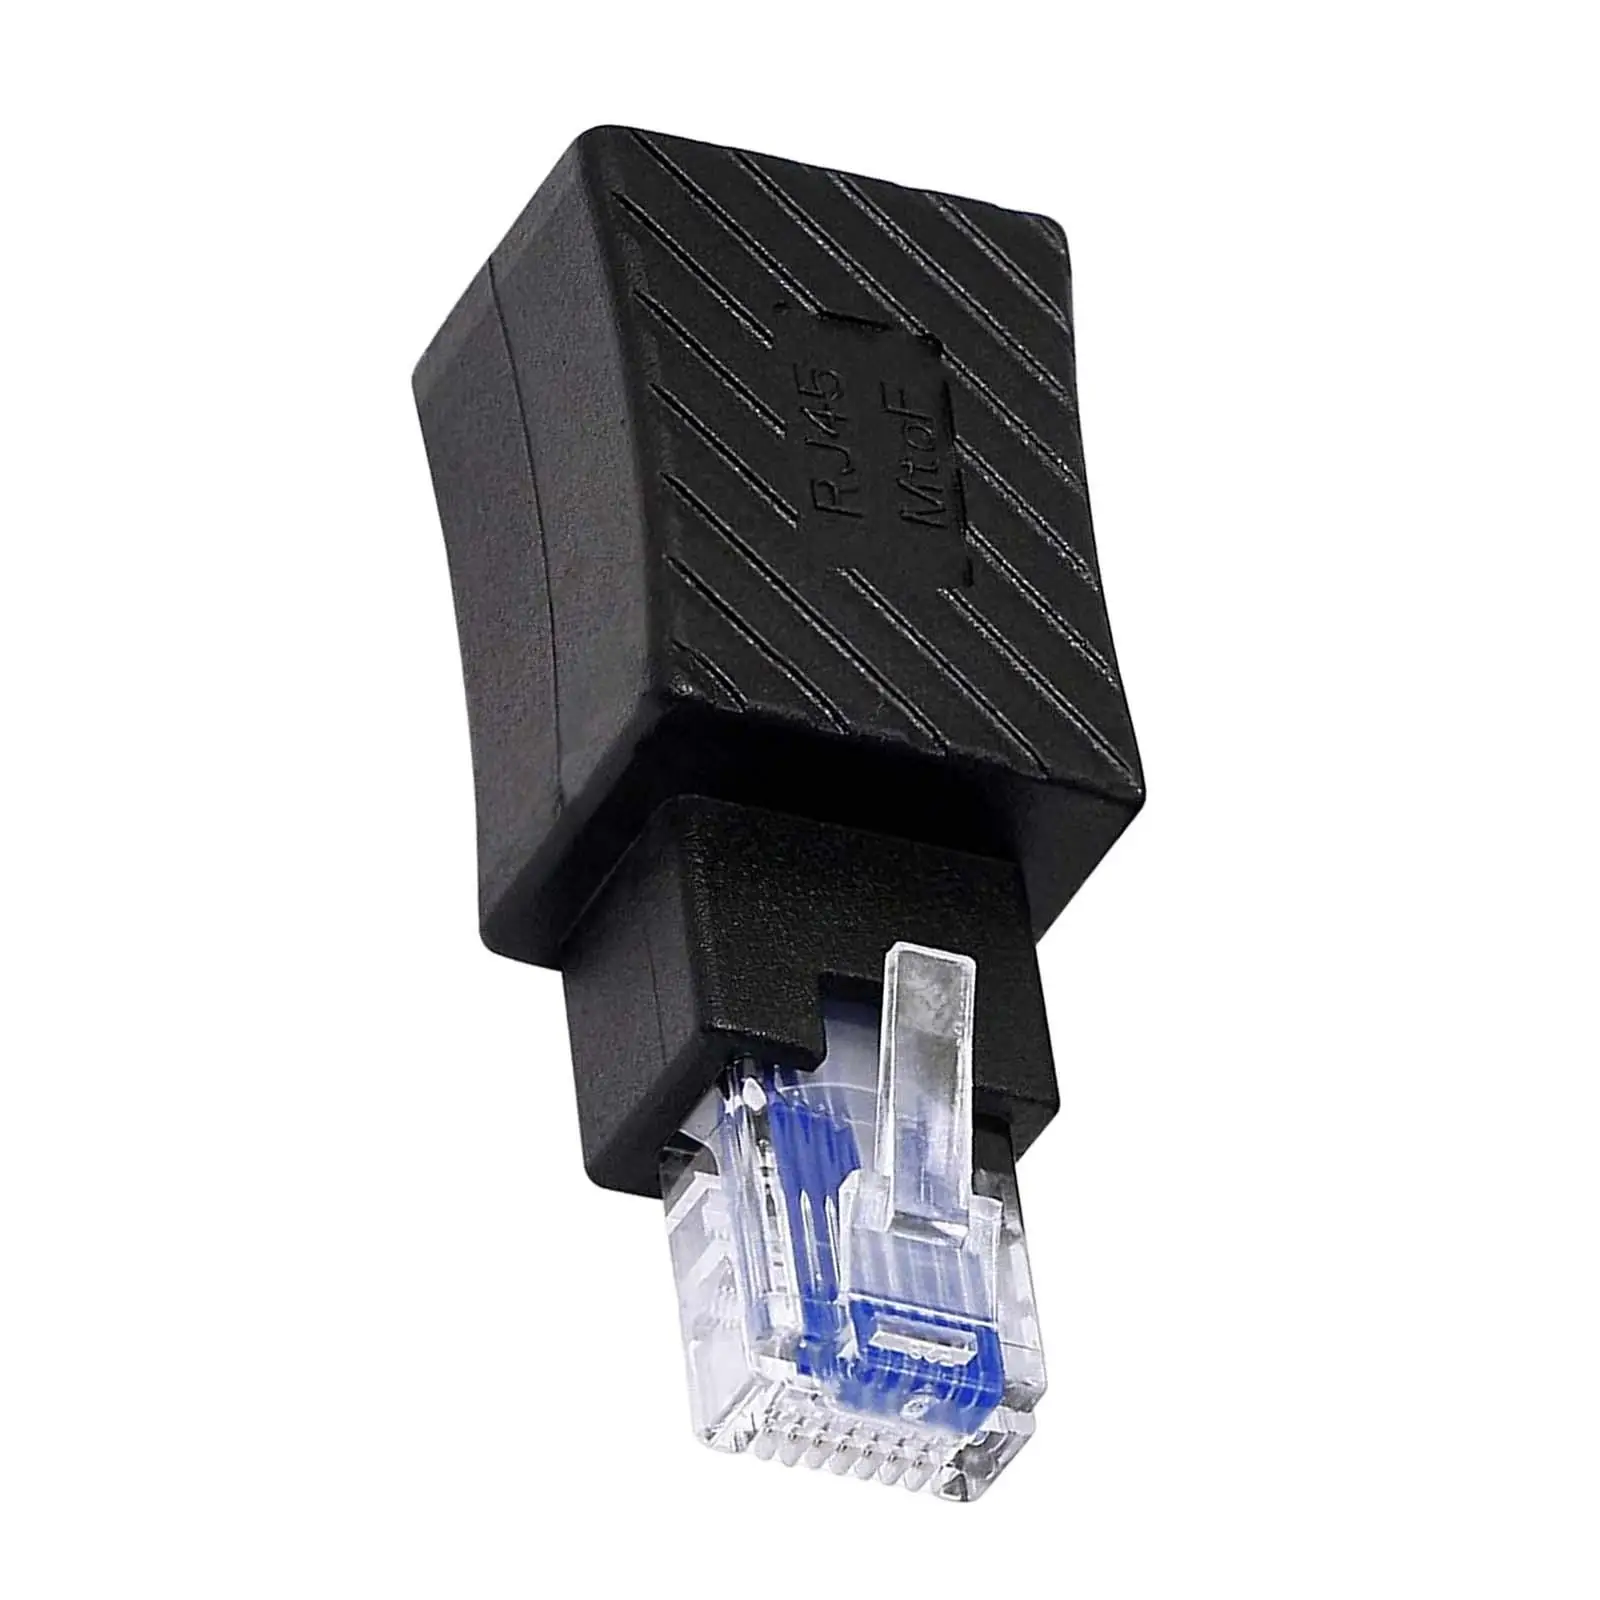 Cat6 Ethernet Adapter 8P8C Female to 8P8C Male Connector for Printers PC Computer Servers Hubs Switches